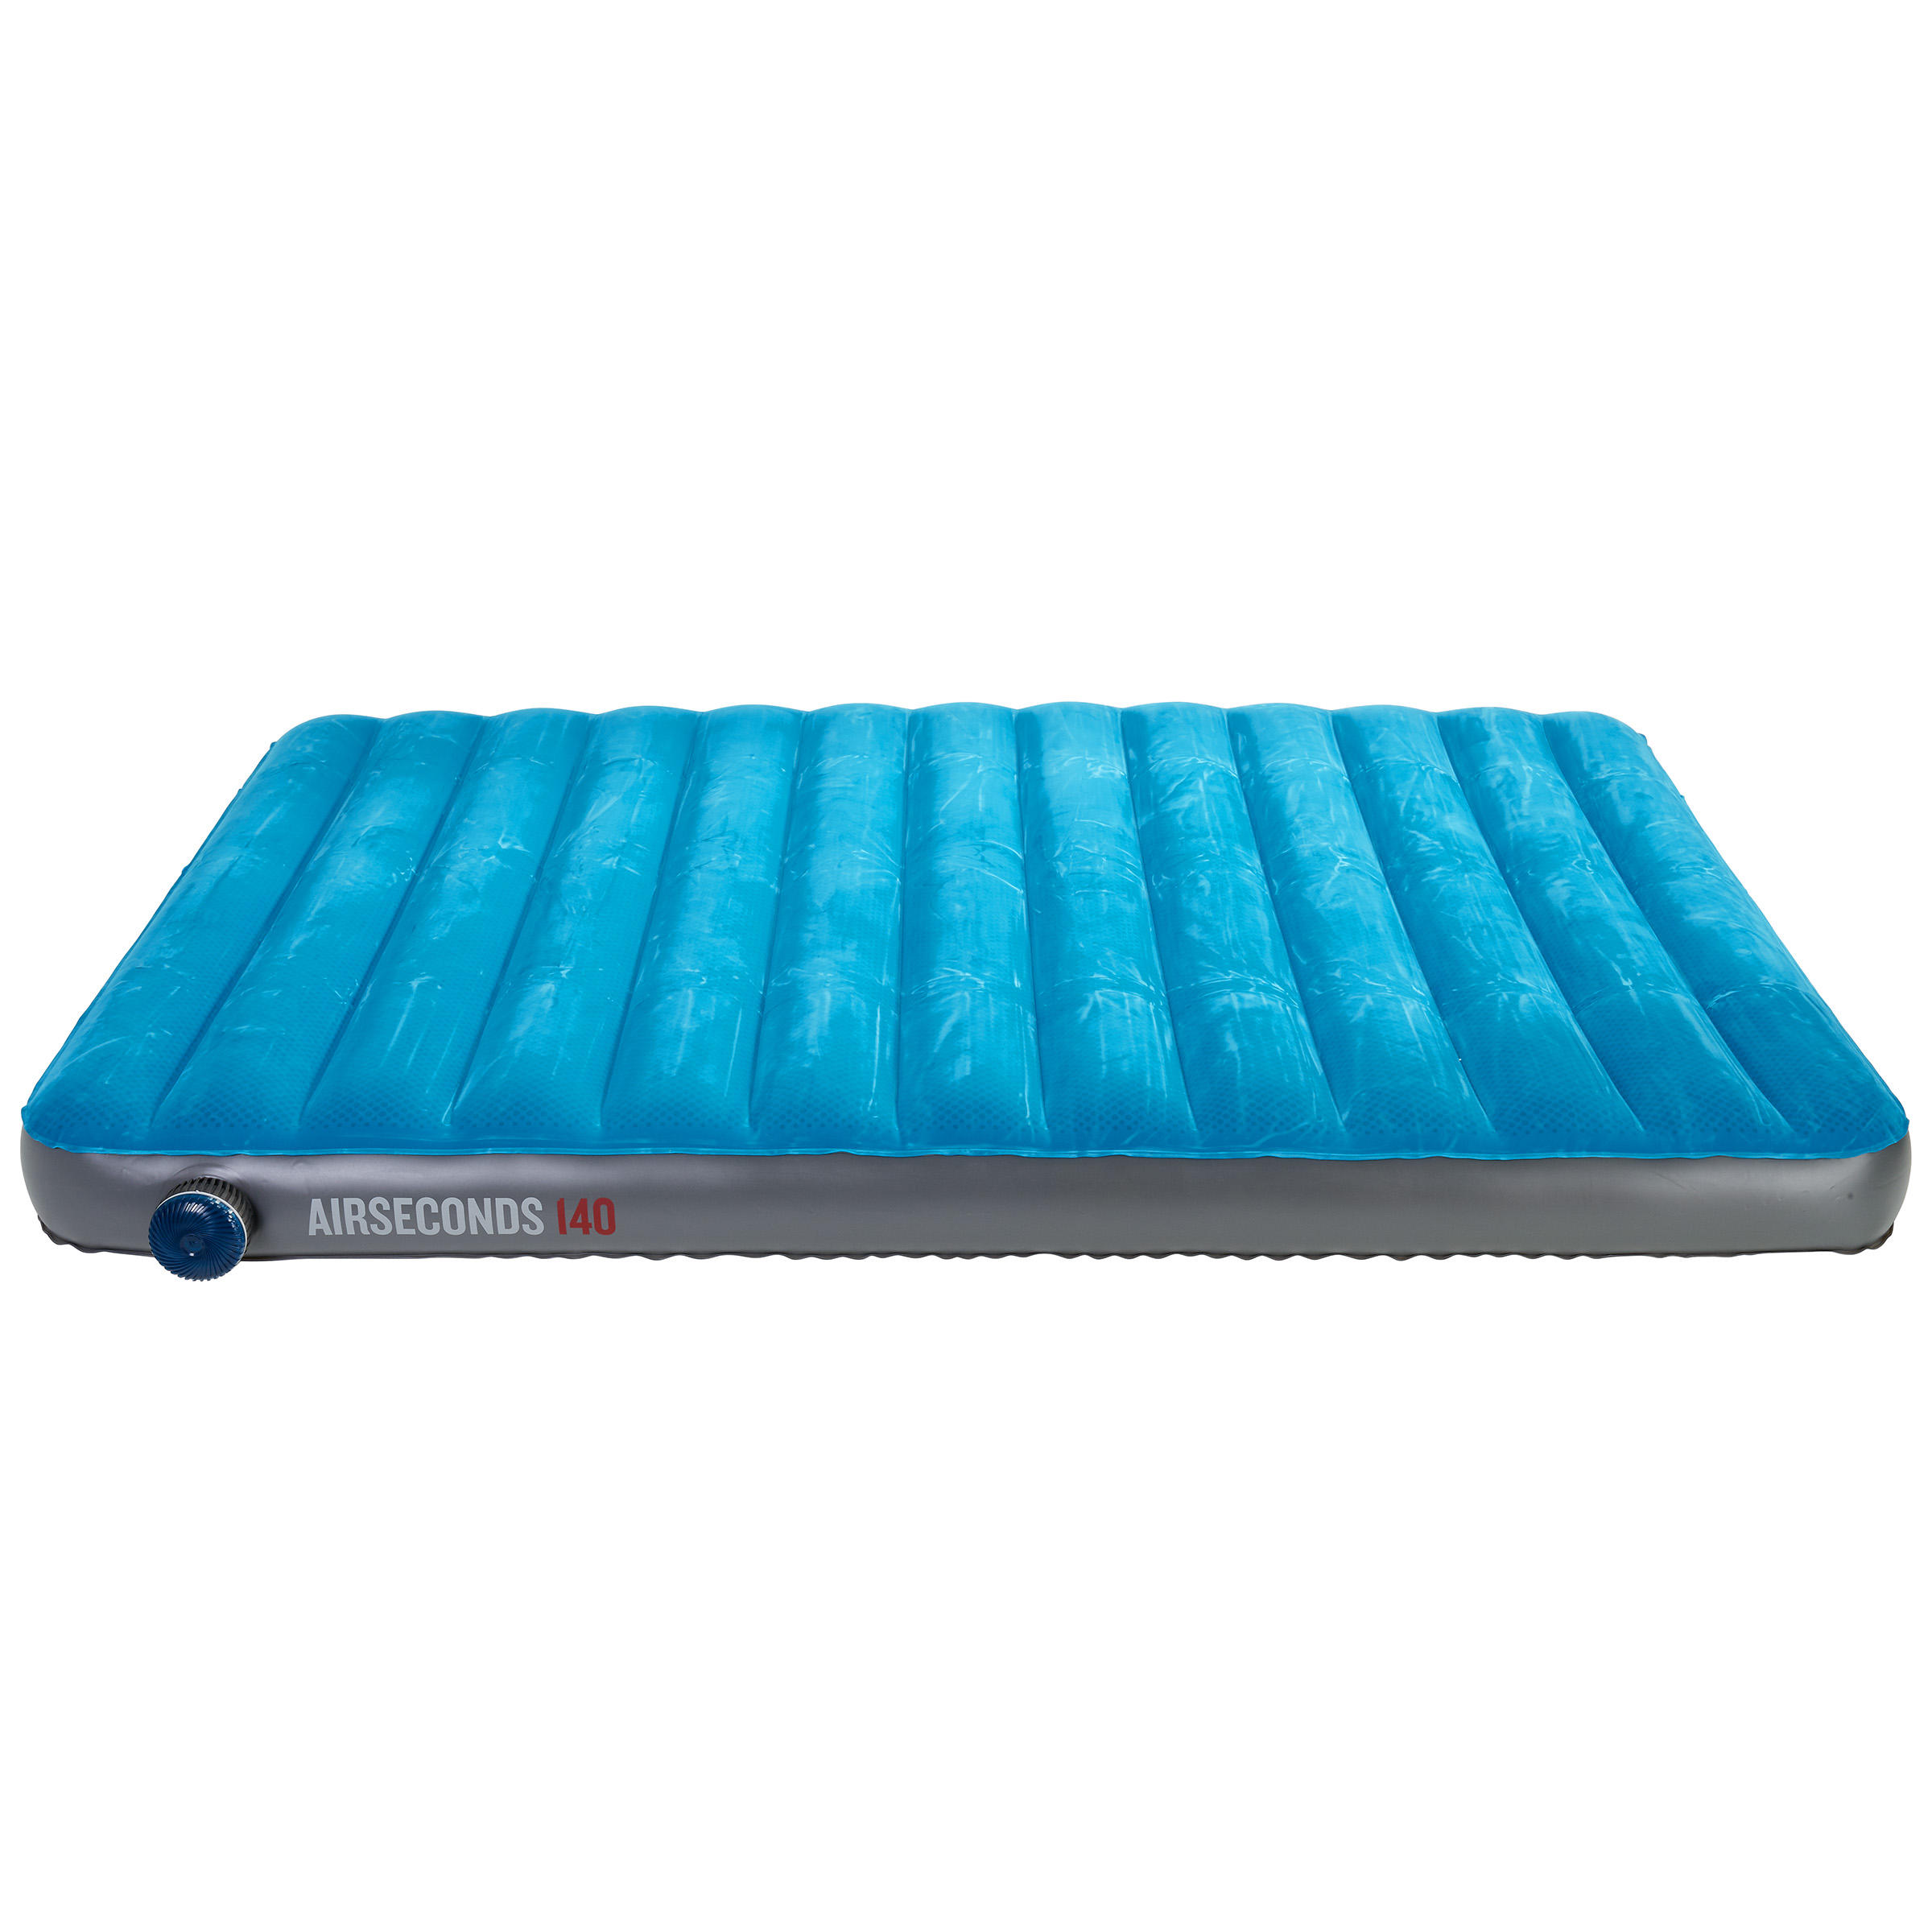 Air Seconds 2 Person Inflatable Mattress 4/10